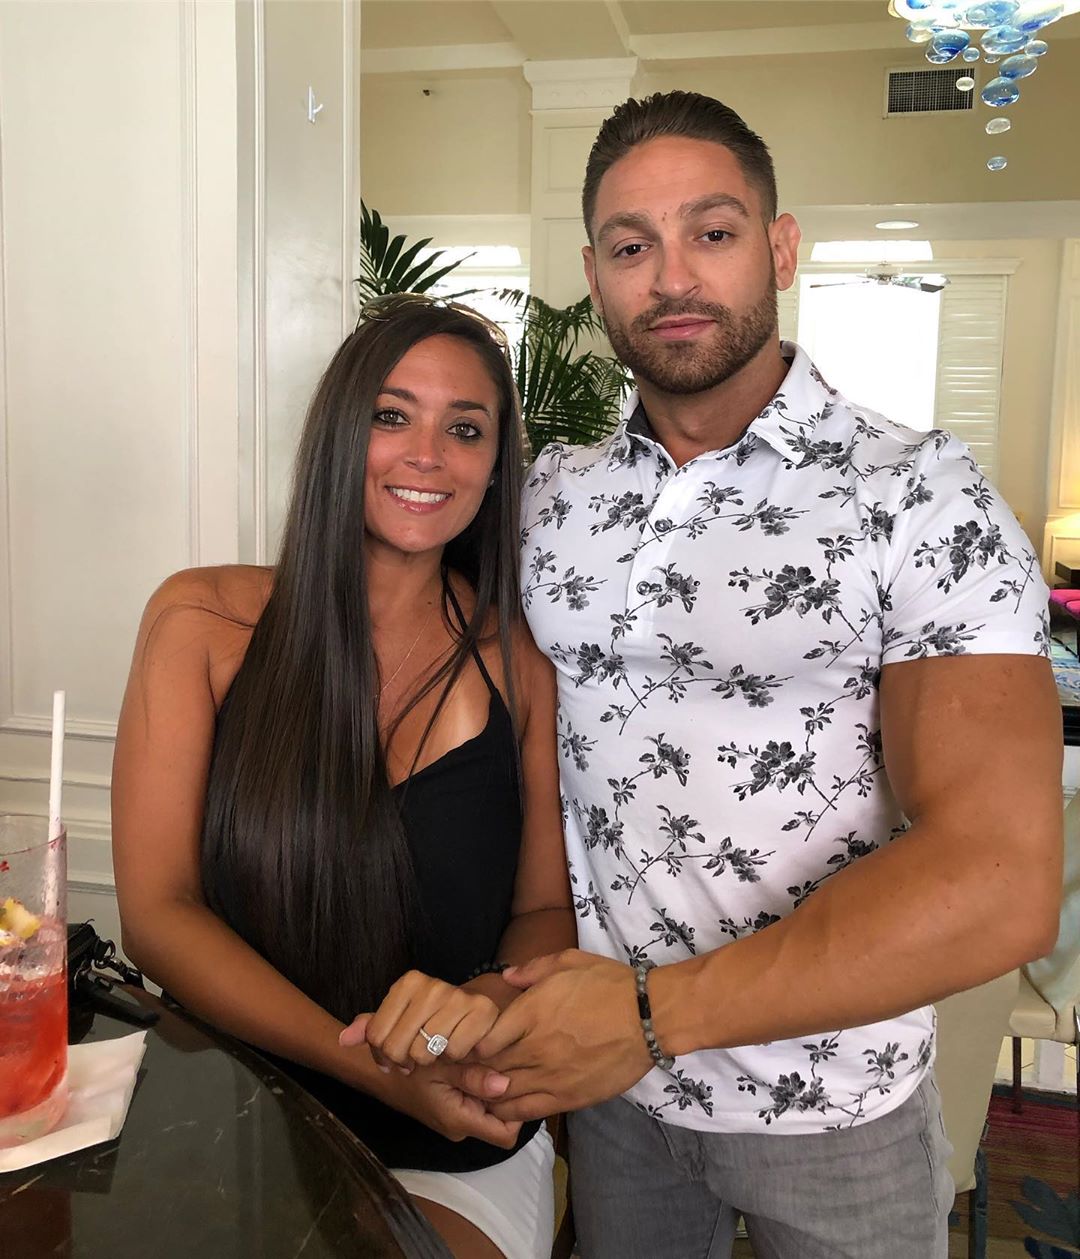 sammi from jersey shore now